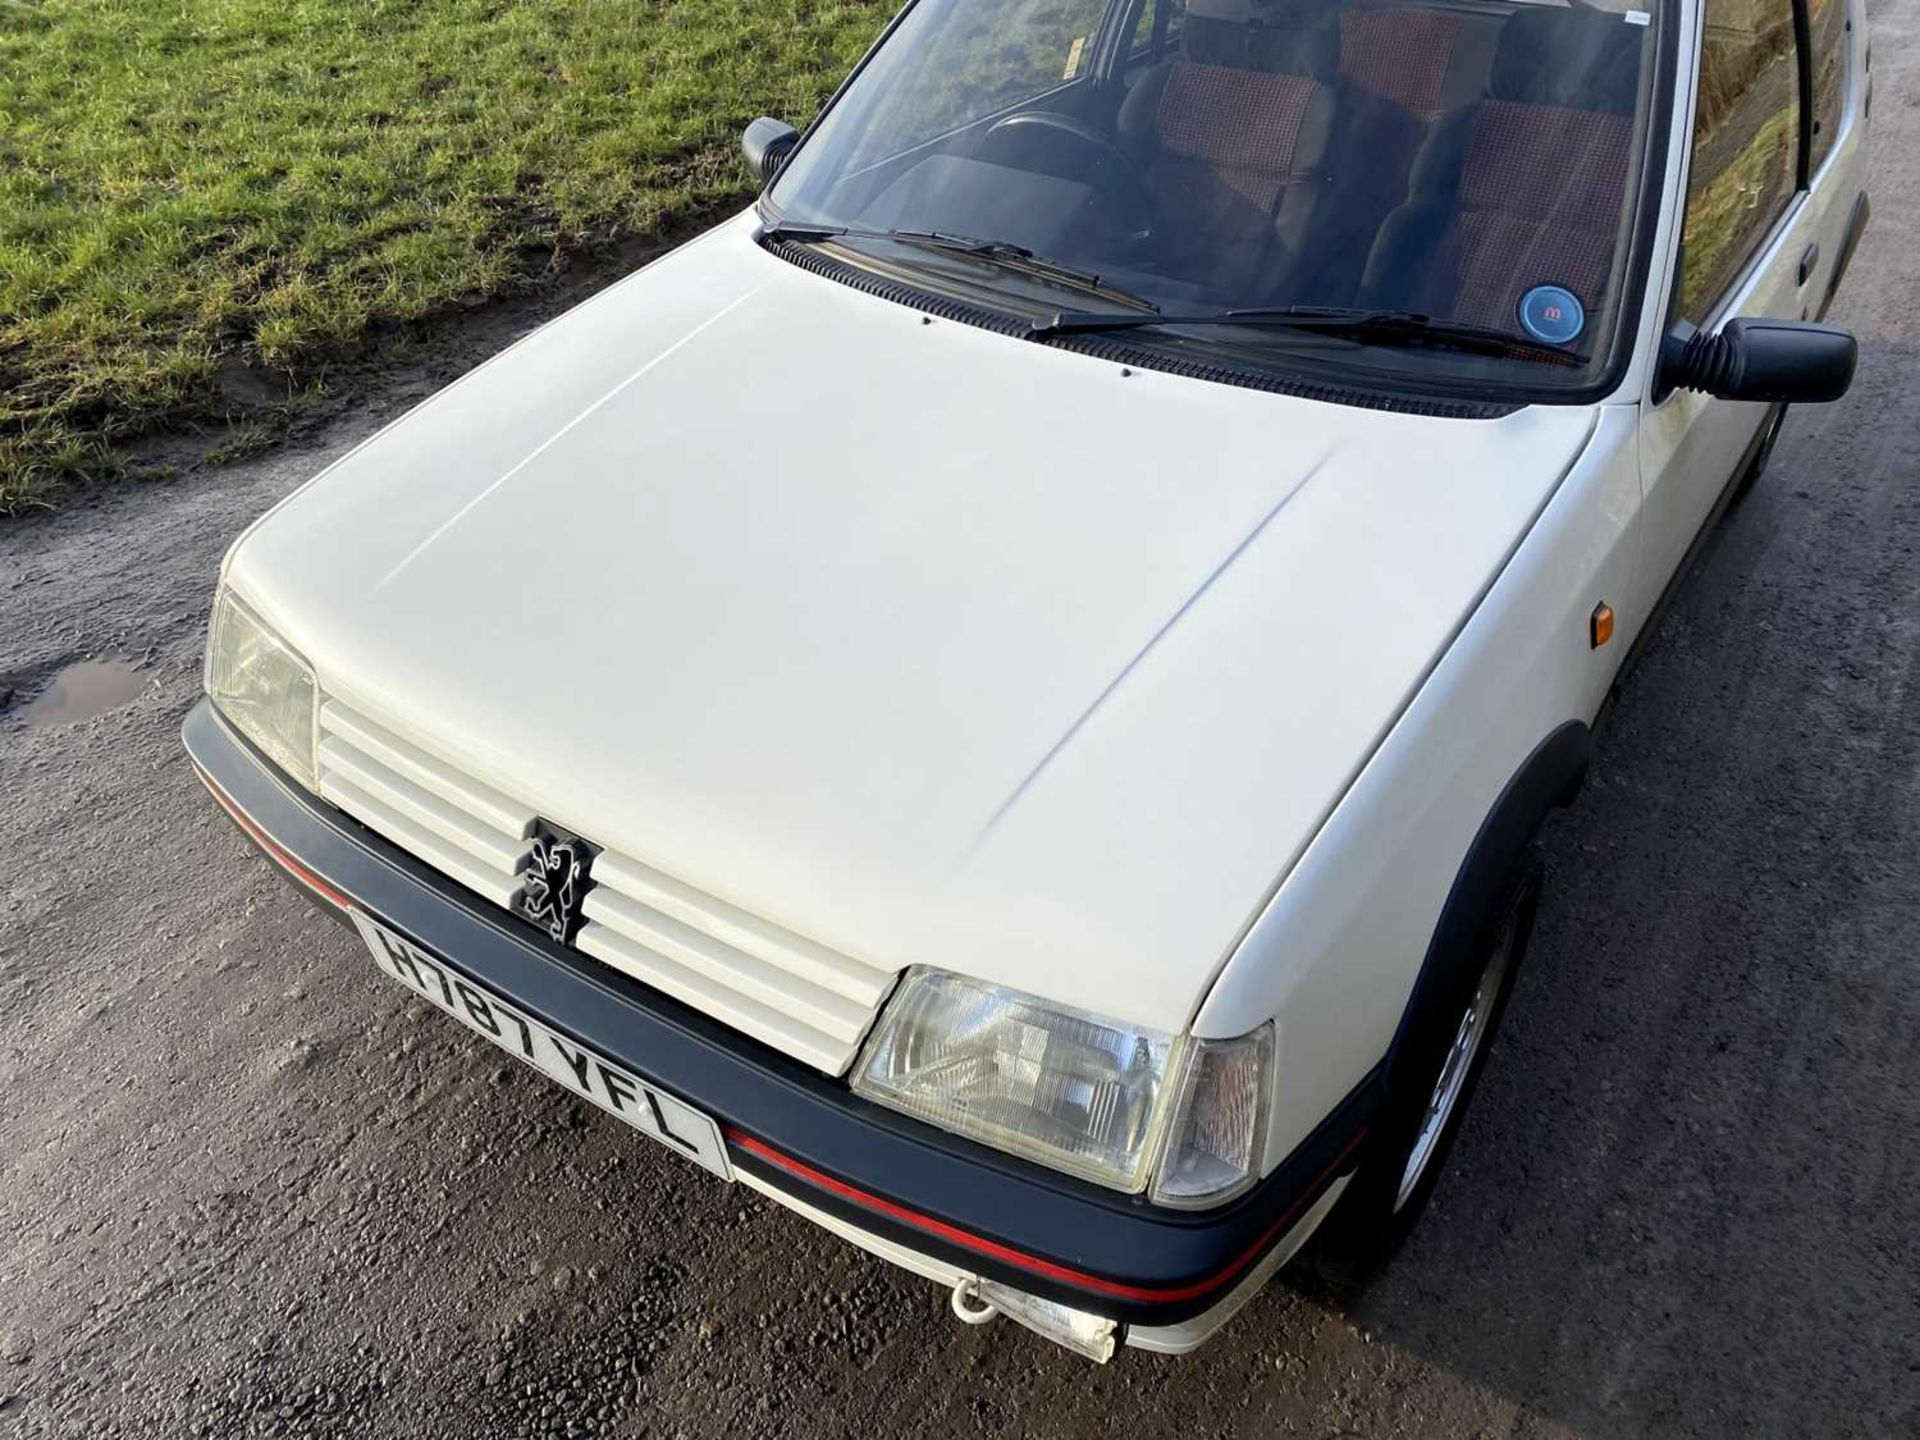 1990 Peugeot 205 GTi 1.6 Only 56,000 miles, same owner for 16 years - Image 74 of 81